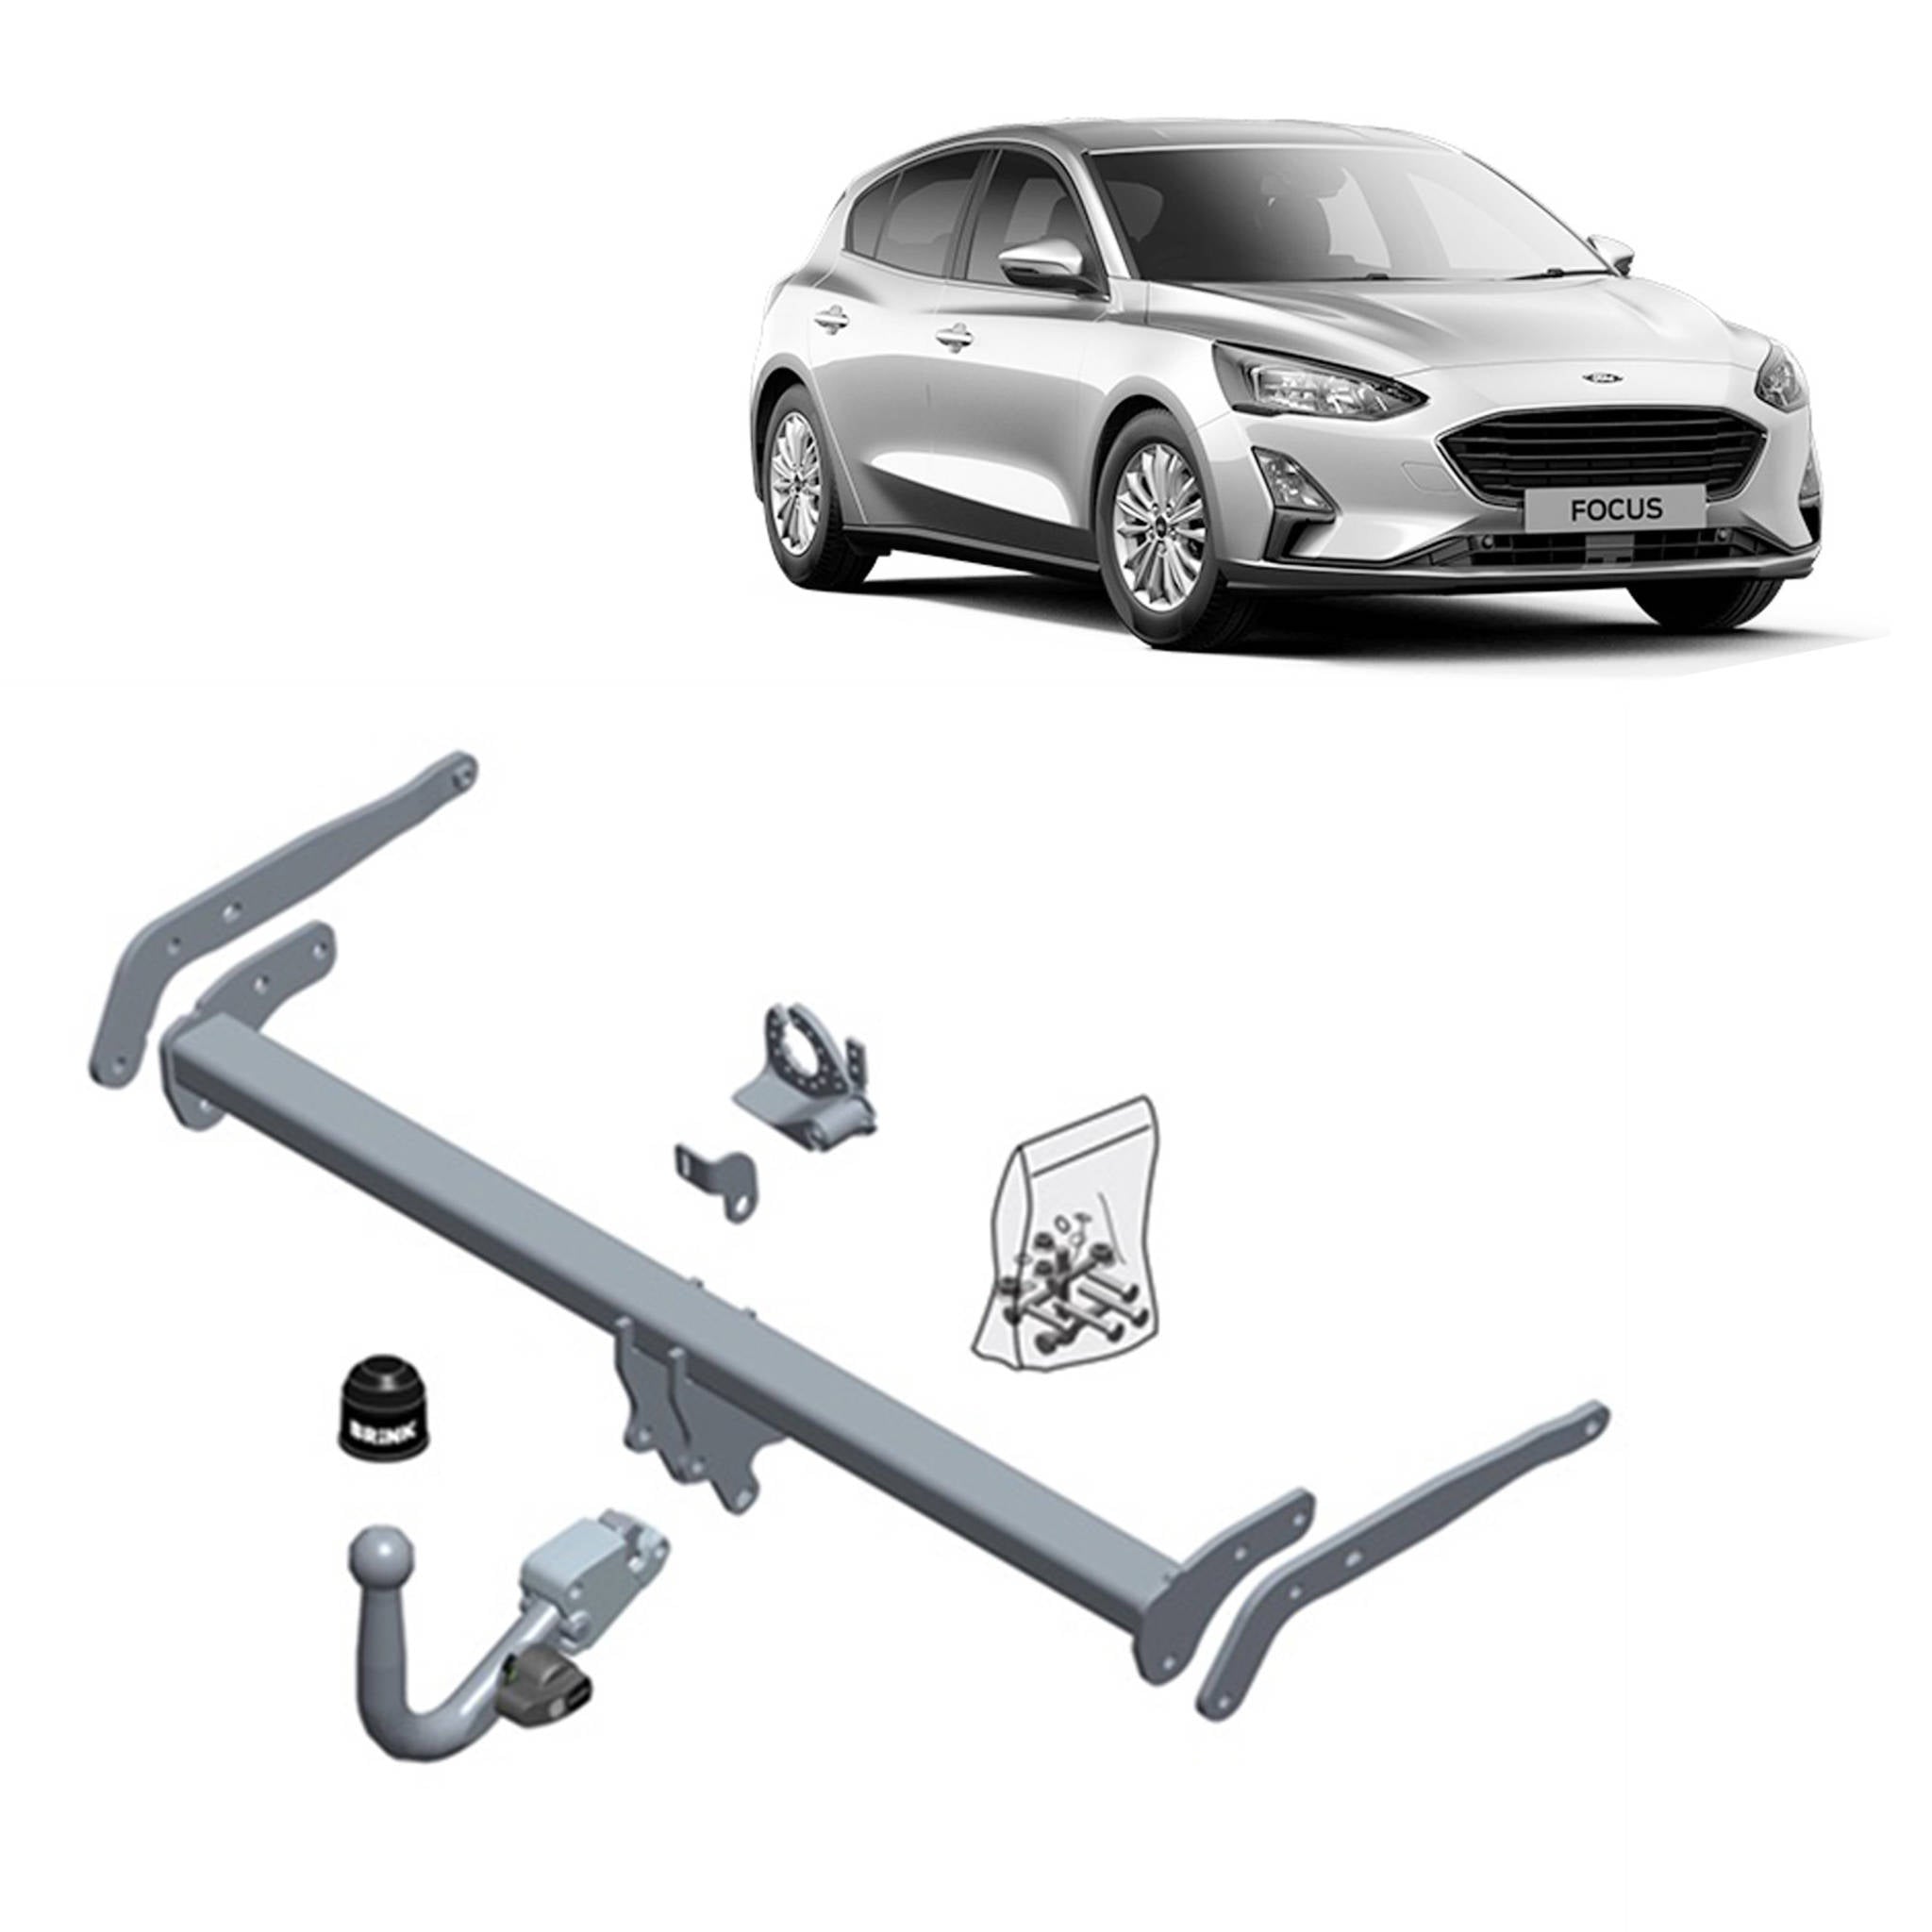 Brink Towbar for Ford Focus (08/2018 - on)